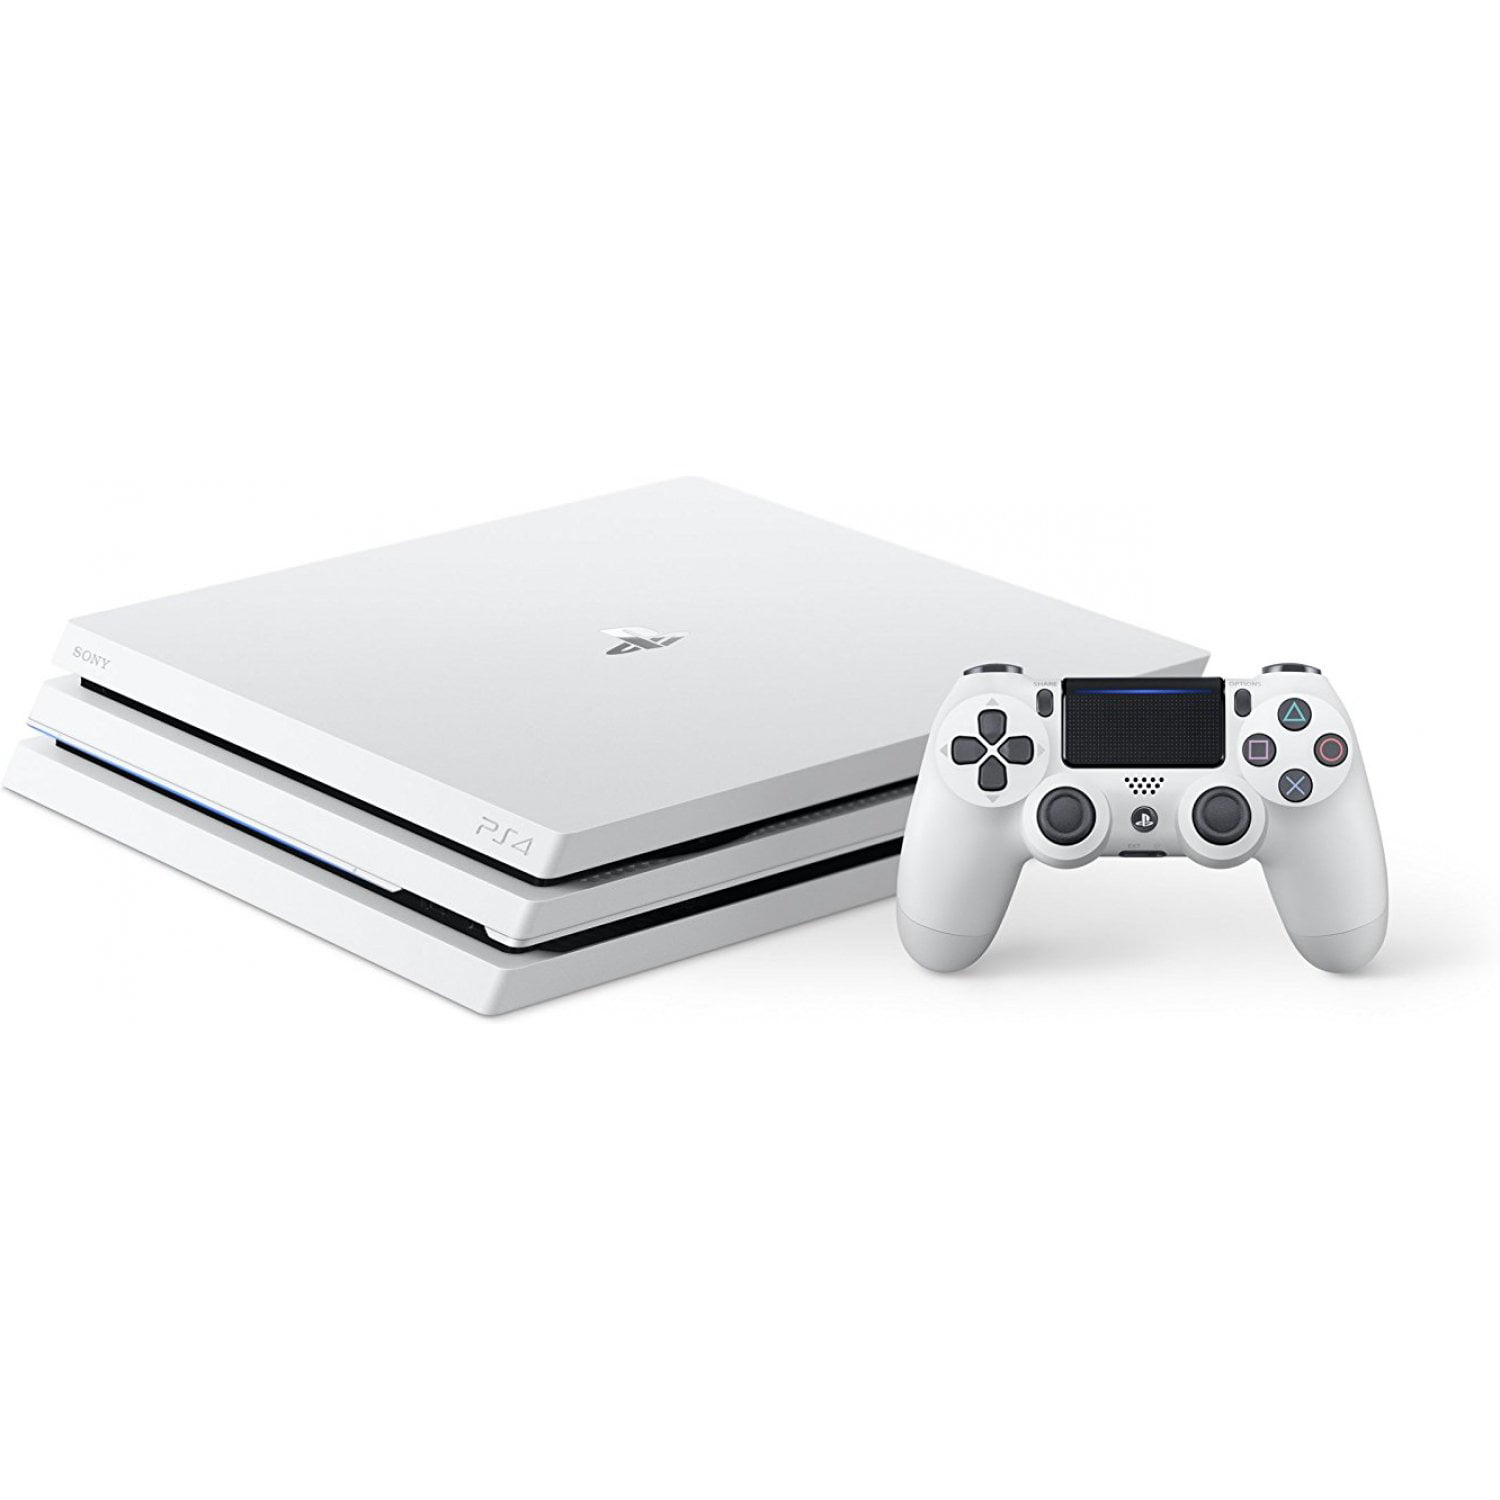 Sony PlayStation 4 Pro 1TB Gaming Console, Glacier White, CUH 